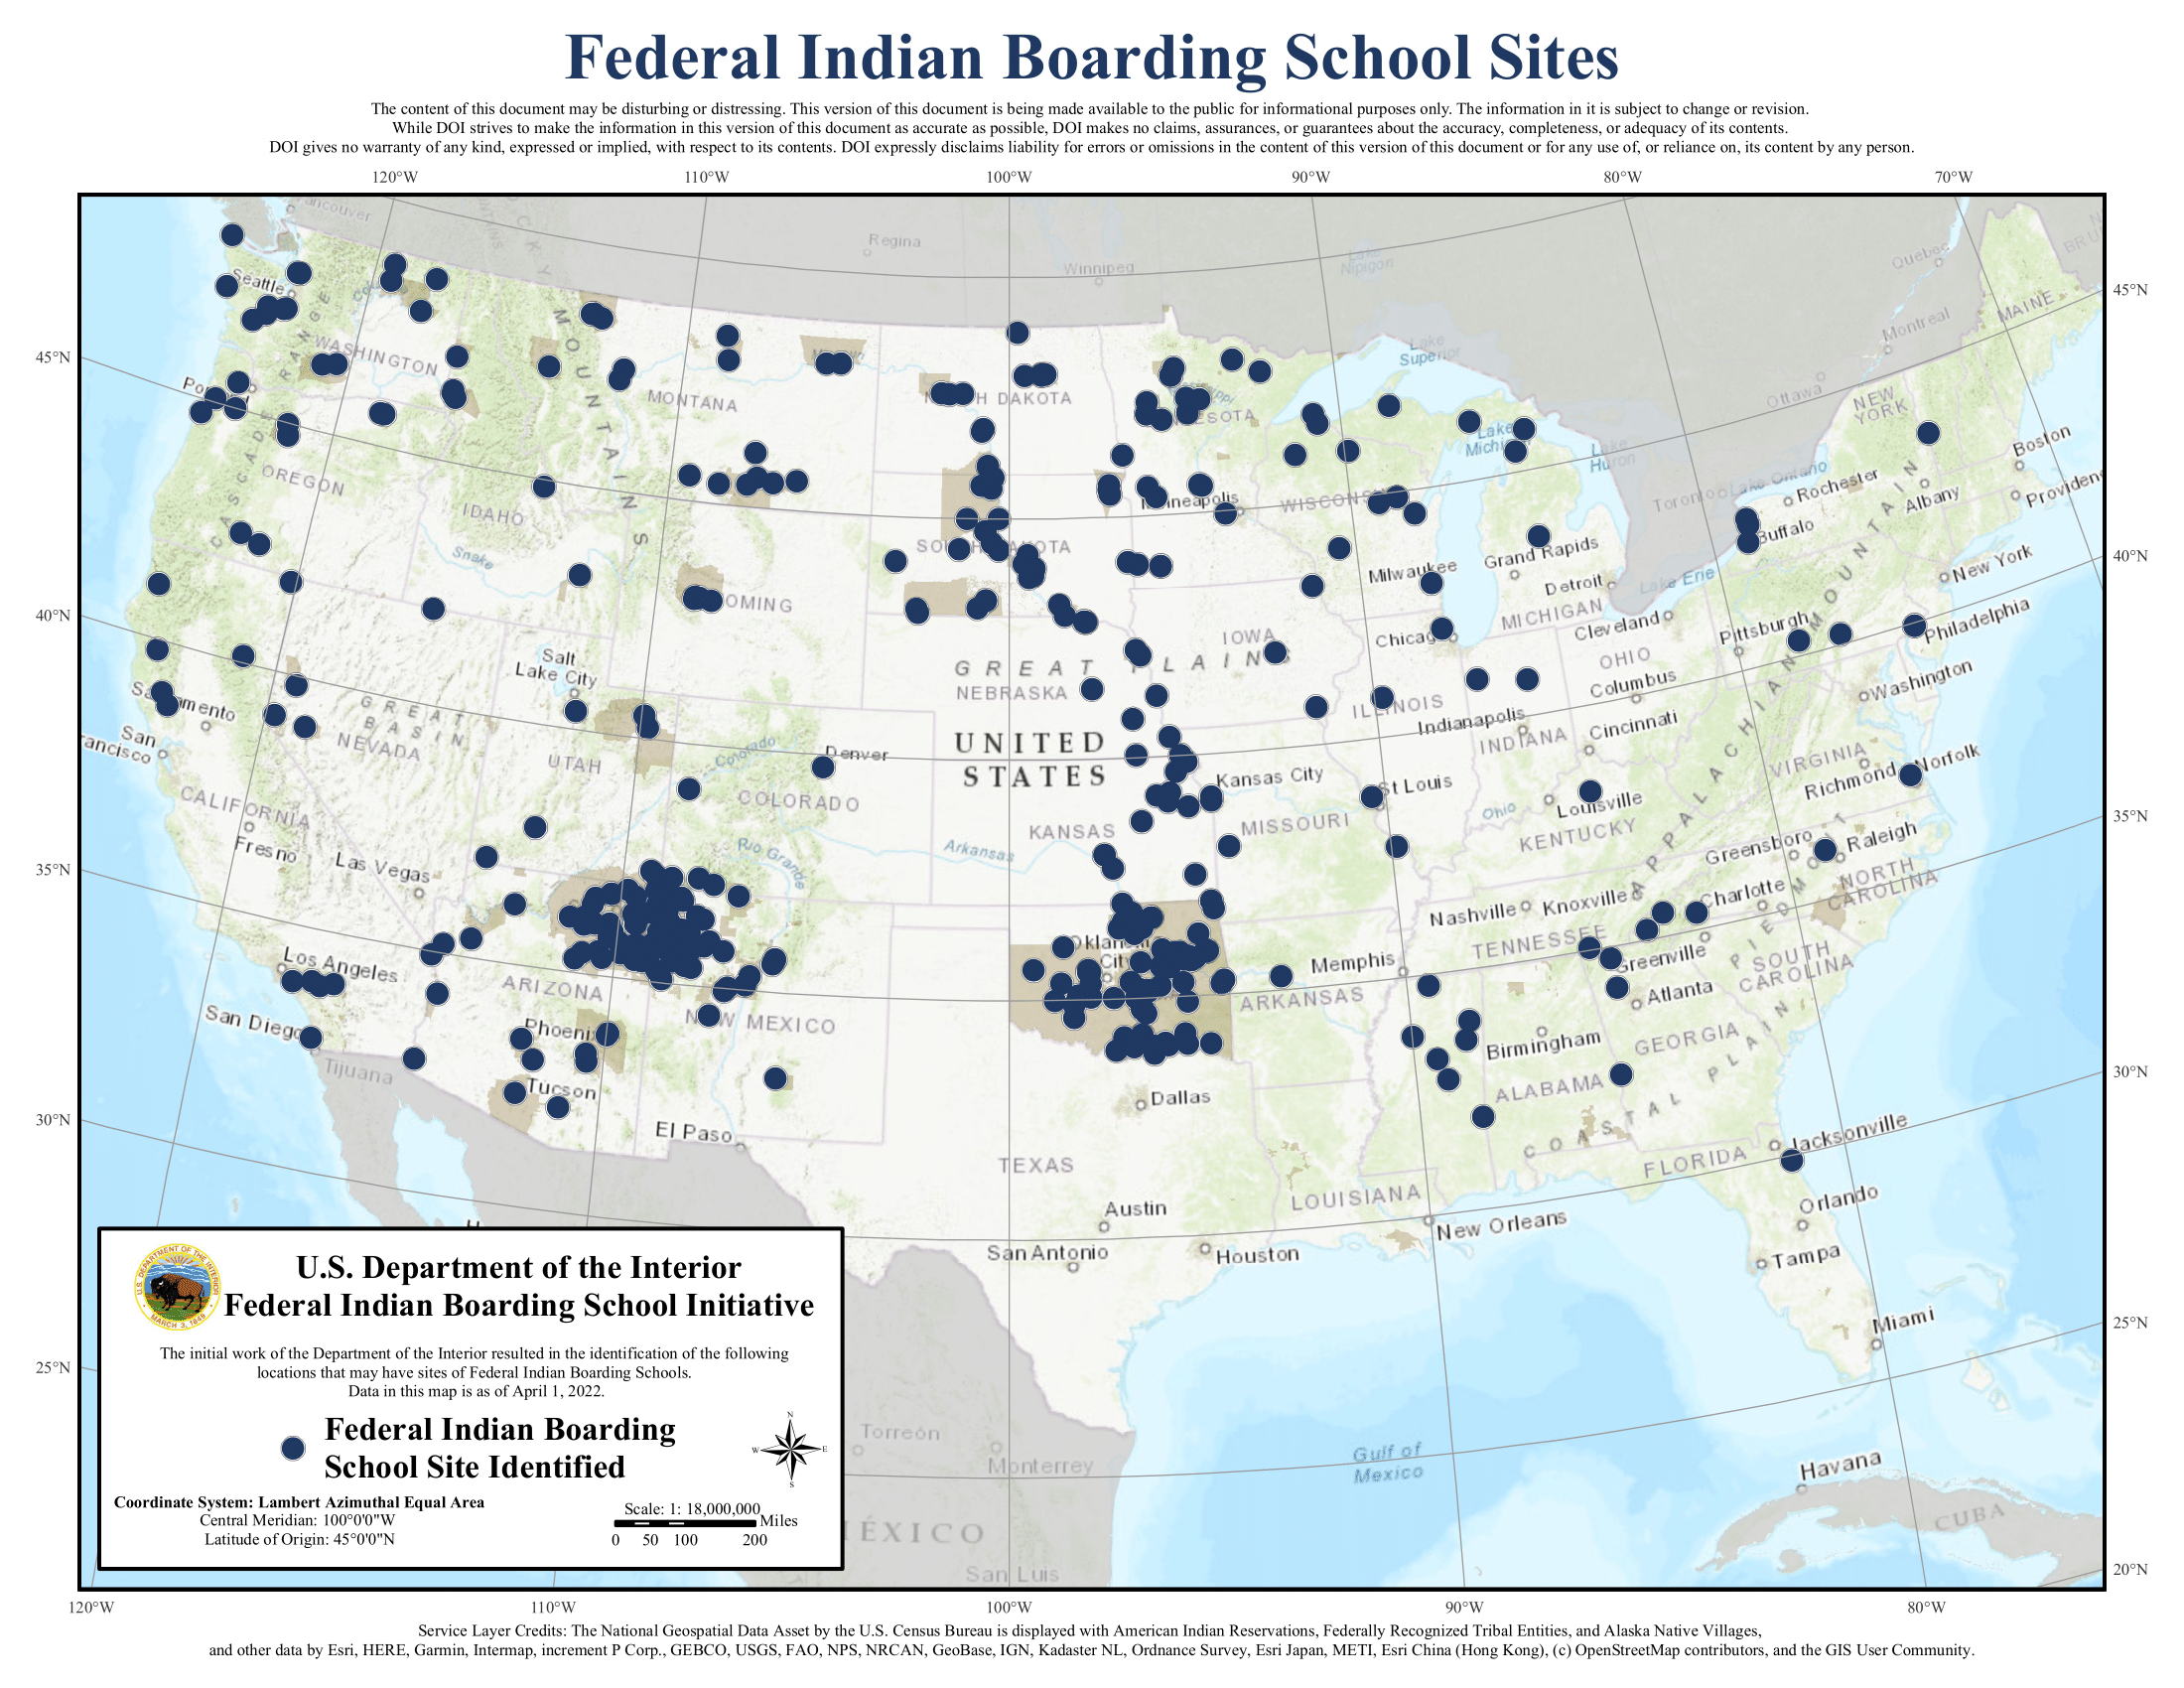 Maps of Federal Indian Boarding School Sites